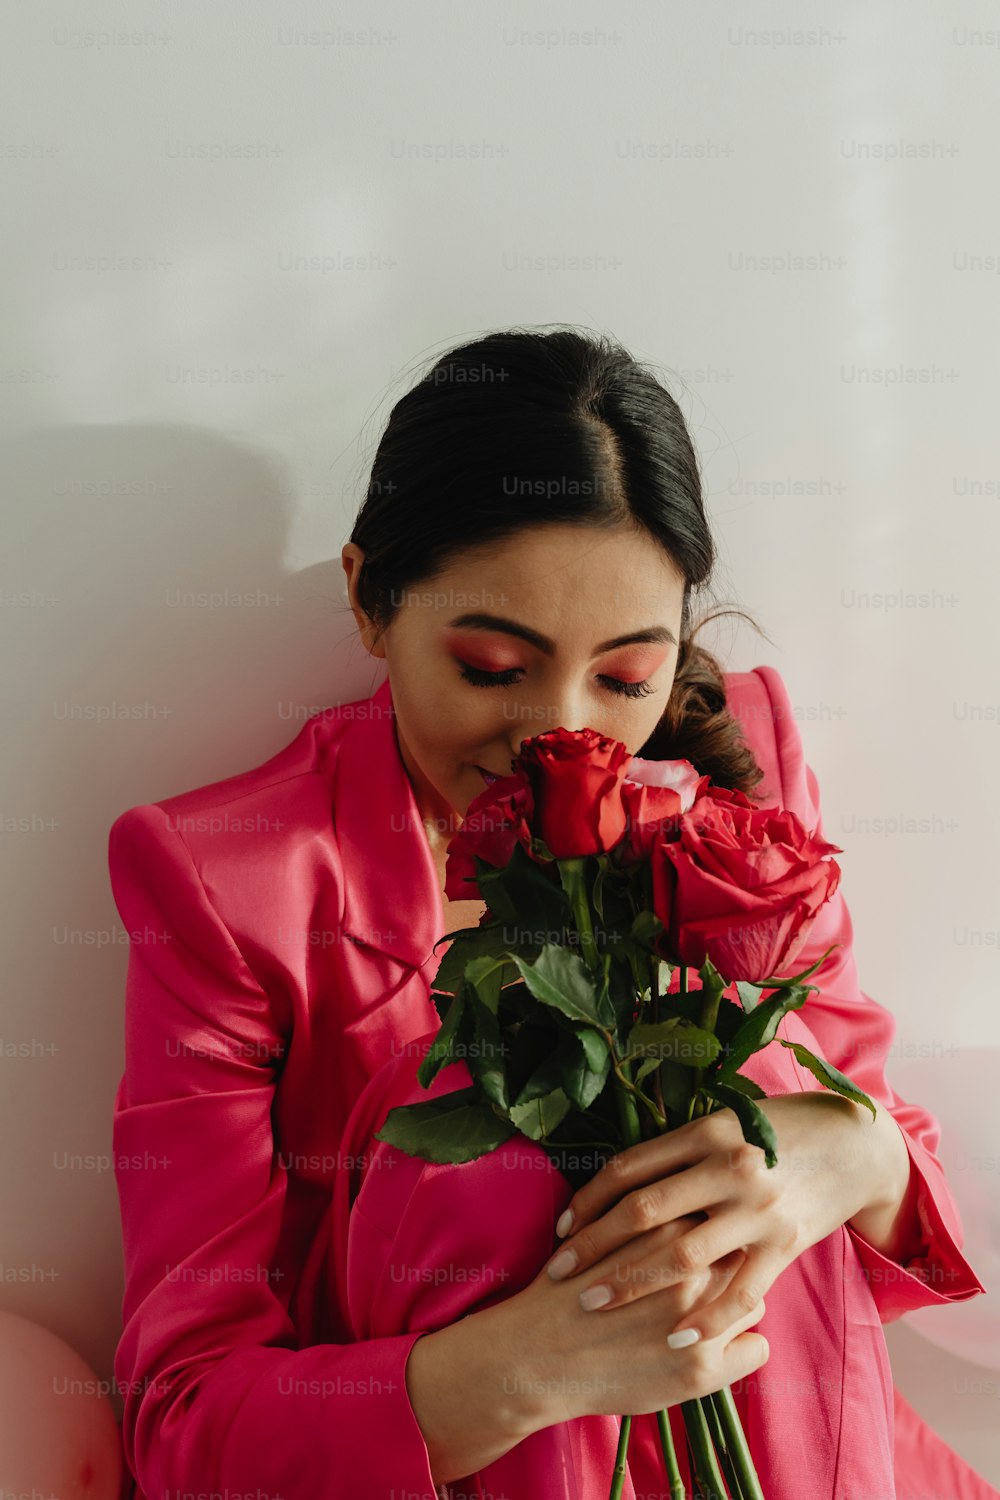 a woman in a pink suit holding a red rose